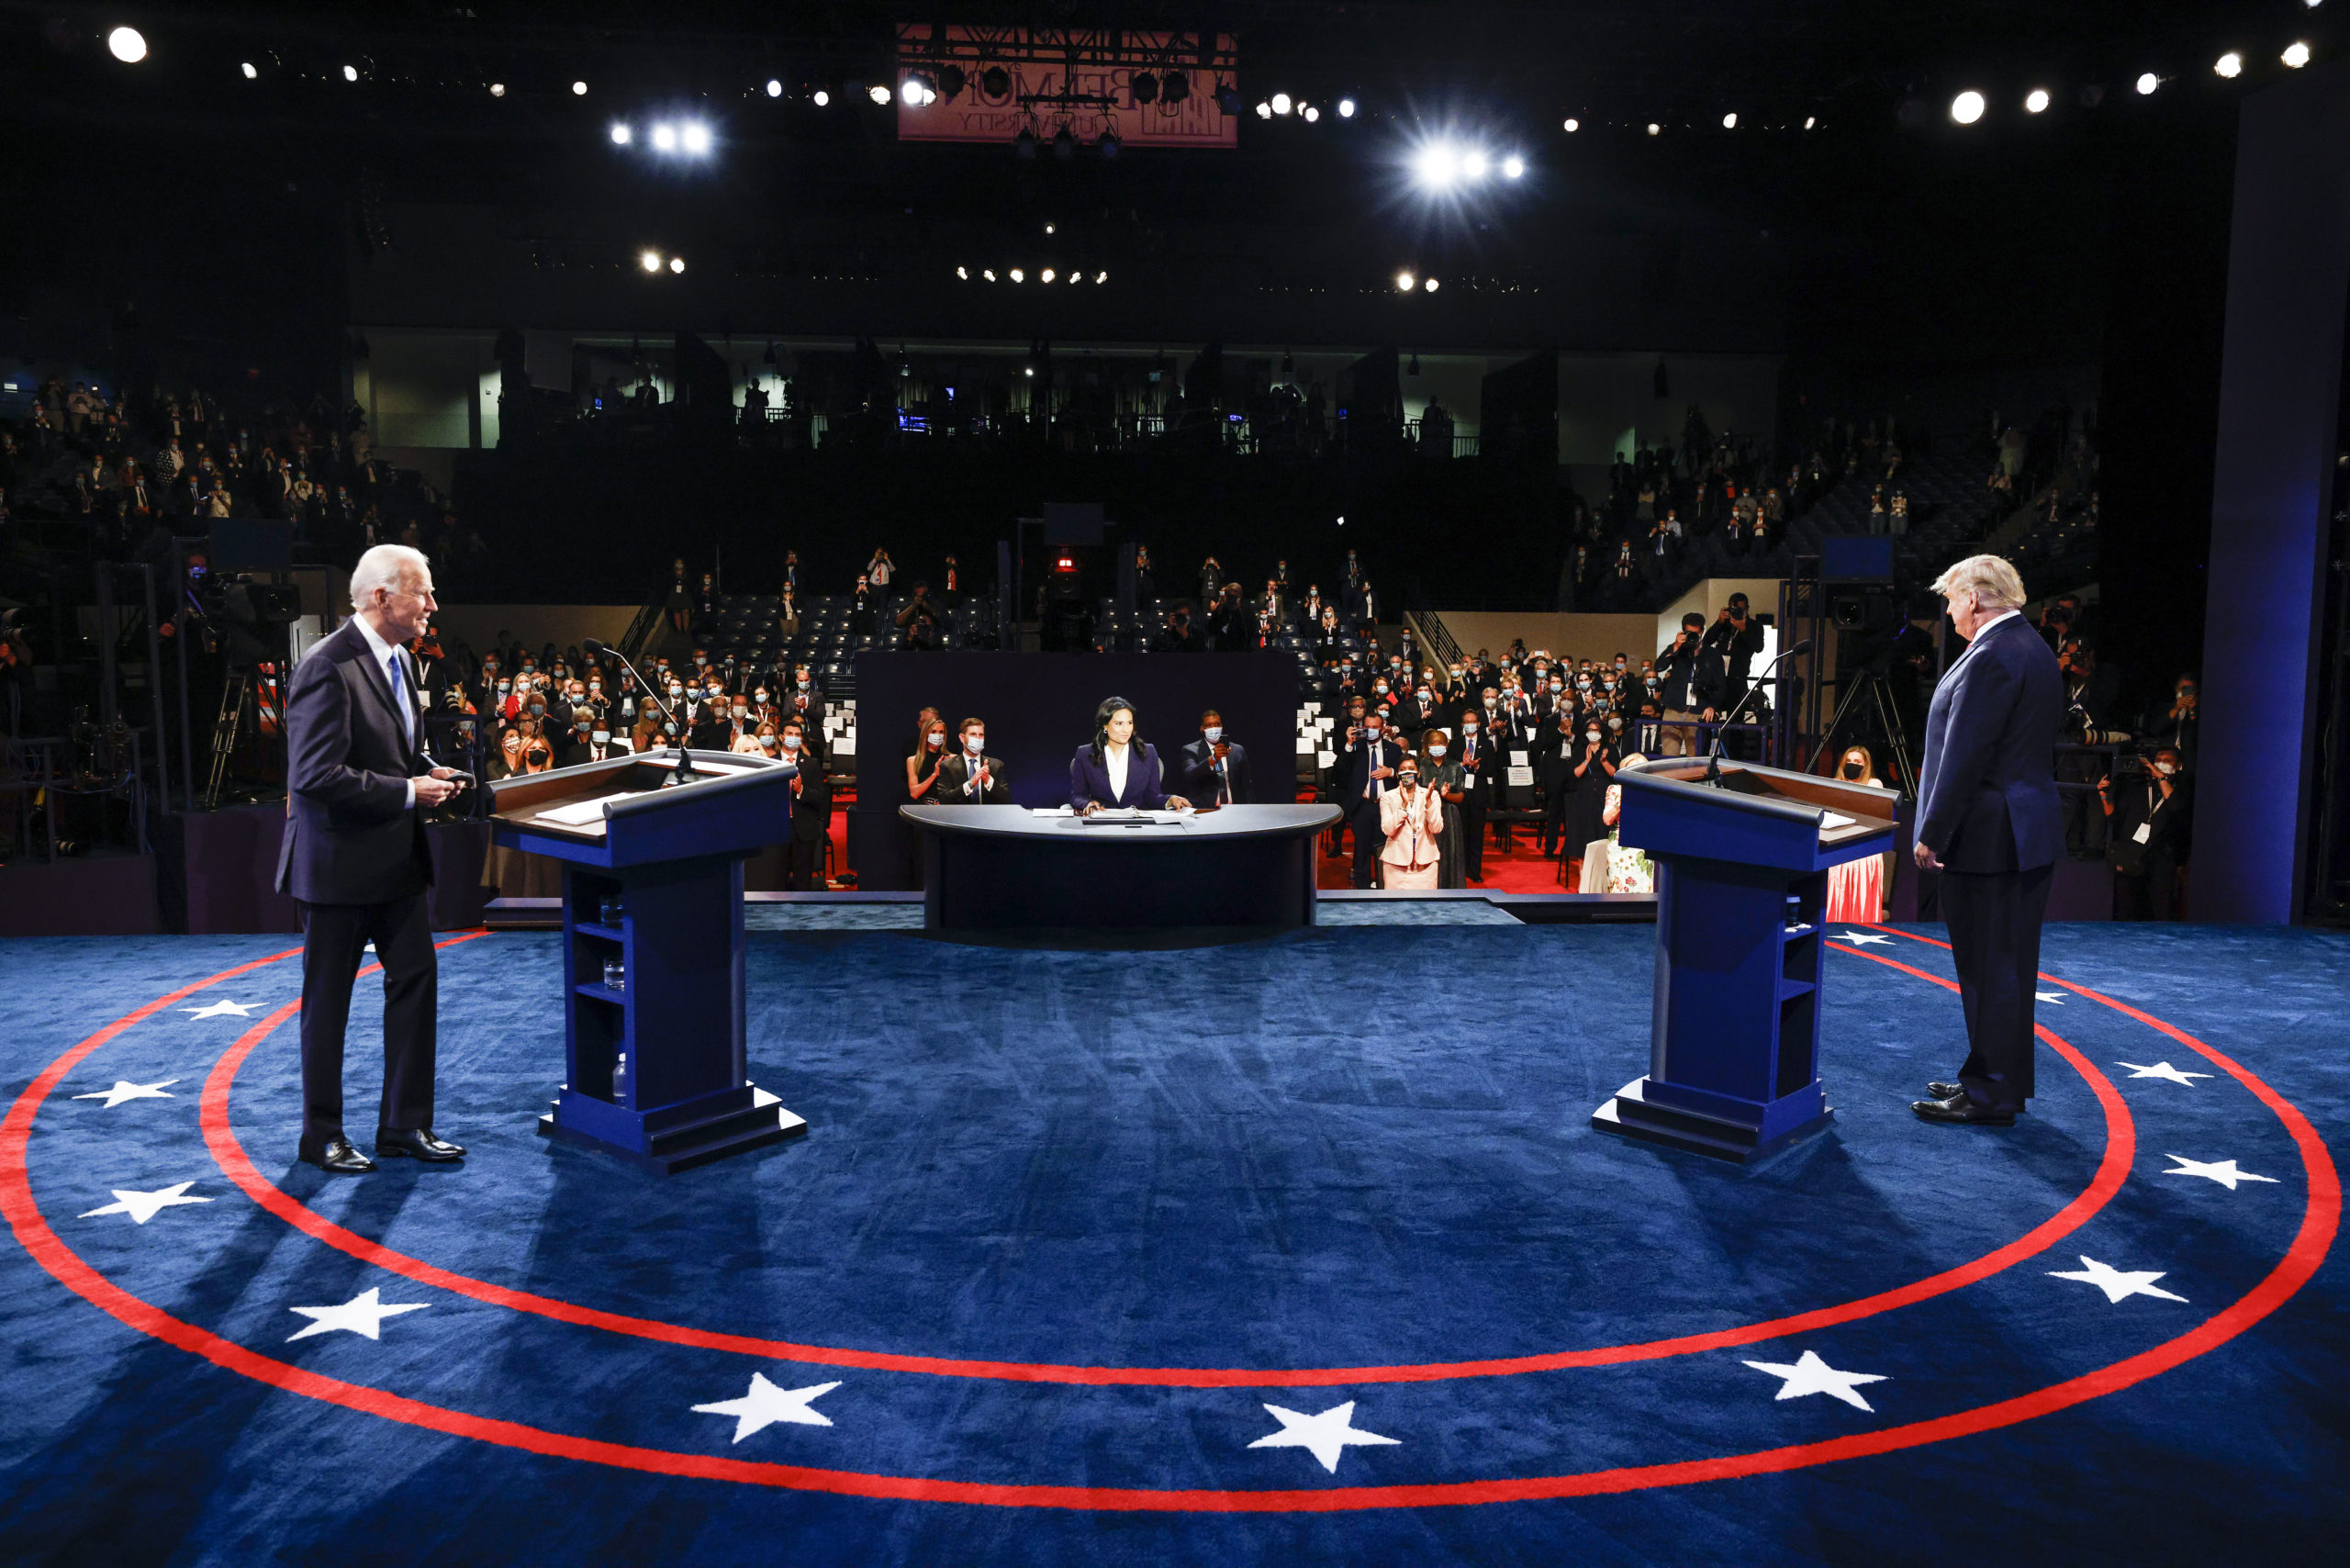 NASHVILLE, TENNESSEE - OCTOBER 22: U.S. President Donald Trump and Democratic presidential nominee Joe Biden arrive onstage for the final presidential debate at Belmont University on October 22, 2020 in Nashville, Tennessee. (Photo by Jim Bourg-Pool/Getty Images)